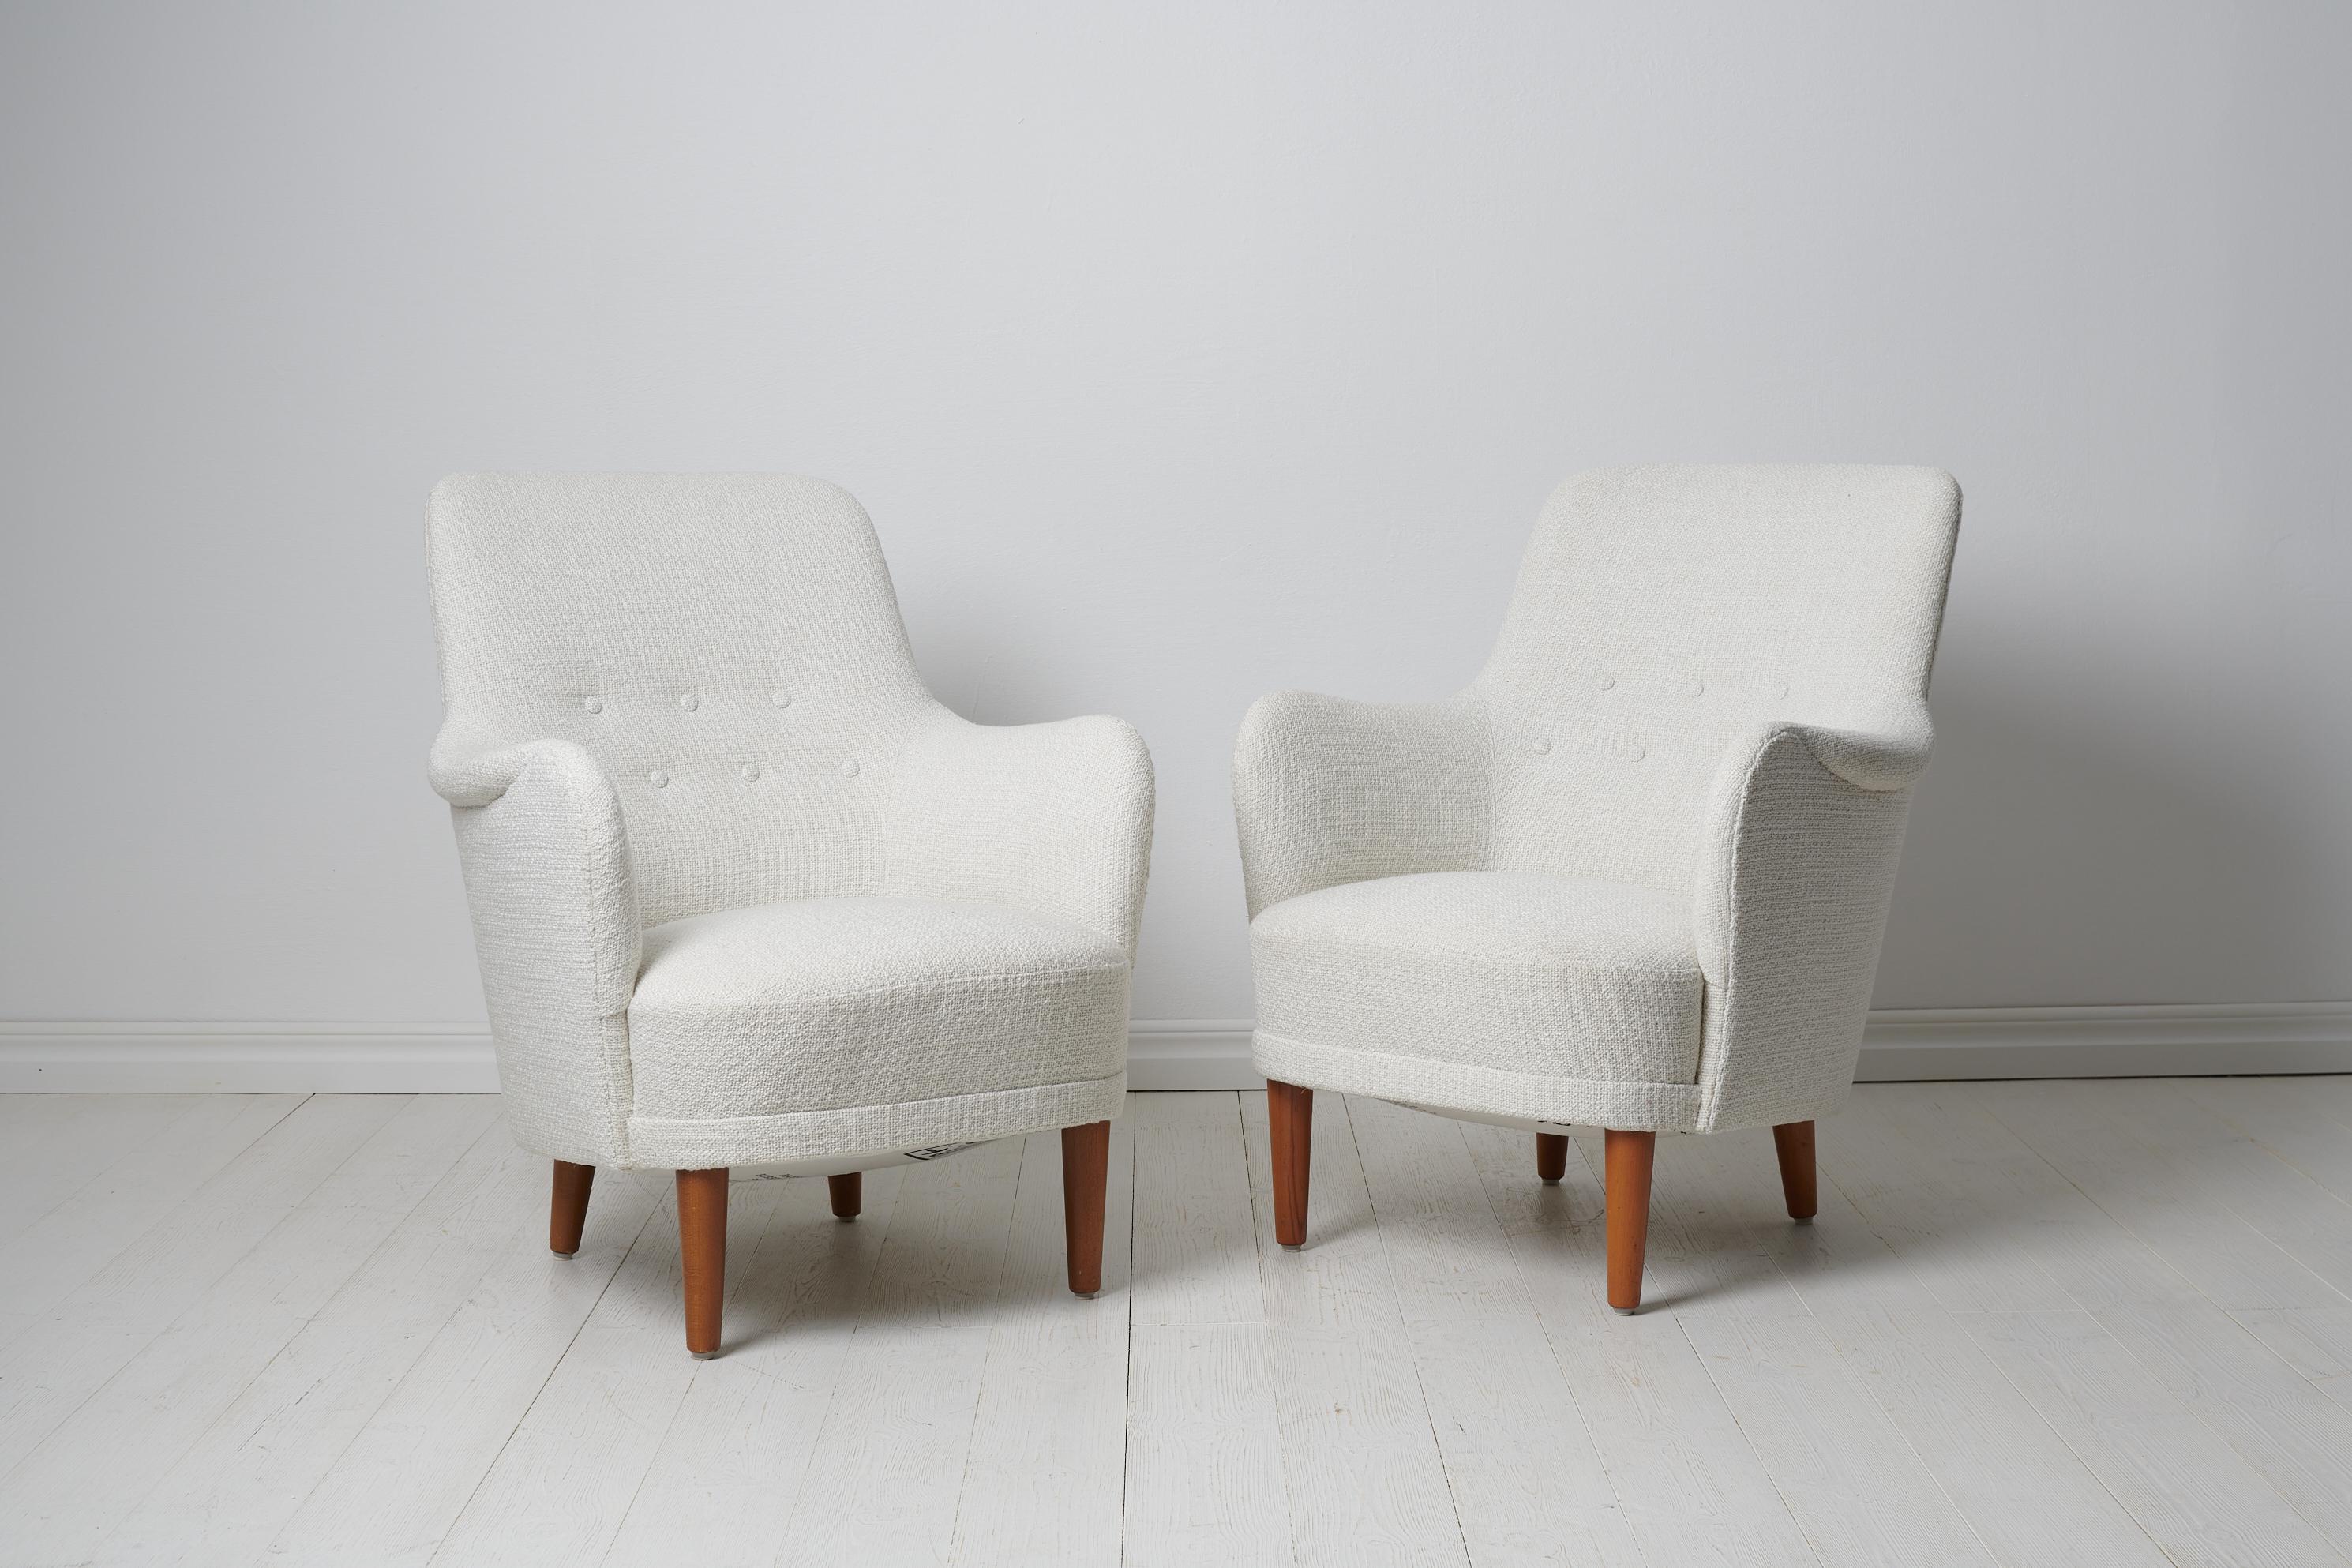 Carl Malmsten Samsas armchairs for O.H. Sjögren from the mid 20th century. The chairs are a Swedish modern classic and the Samsas series is today recognised as the most characteristic designs from Malmsten. The armchairs Samsas is a 1960s favourite